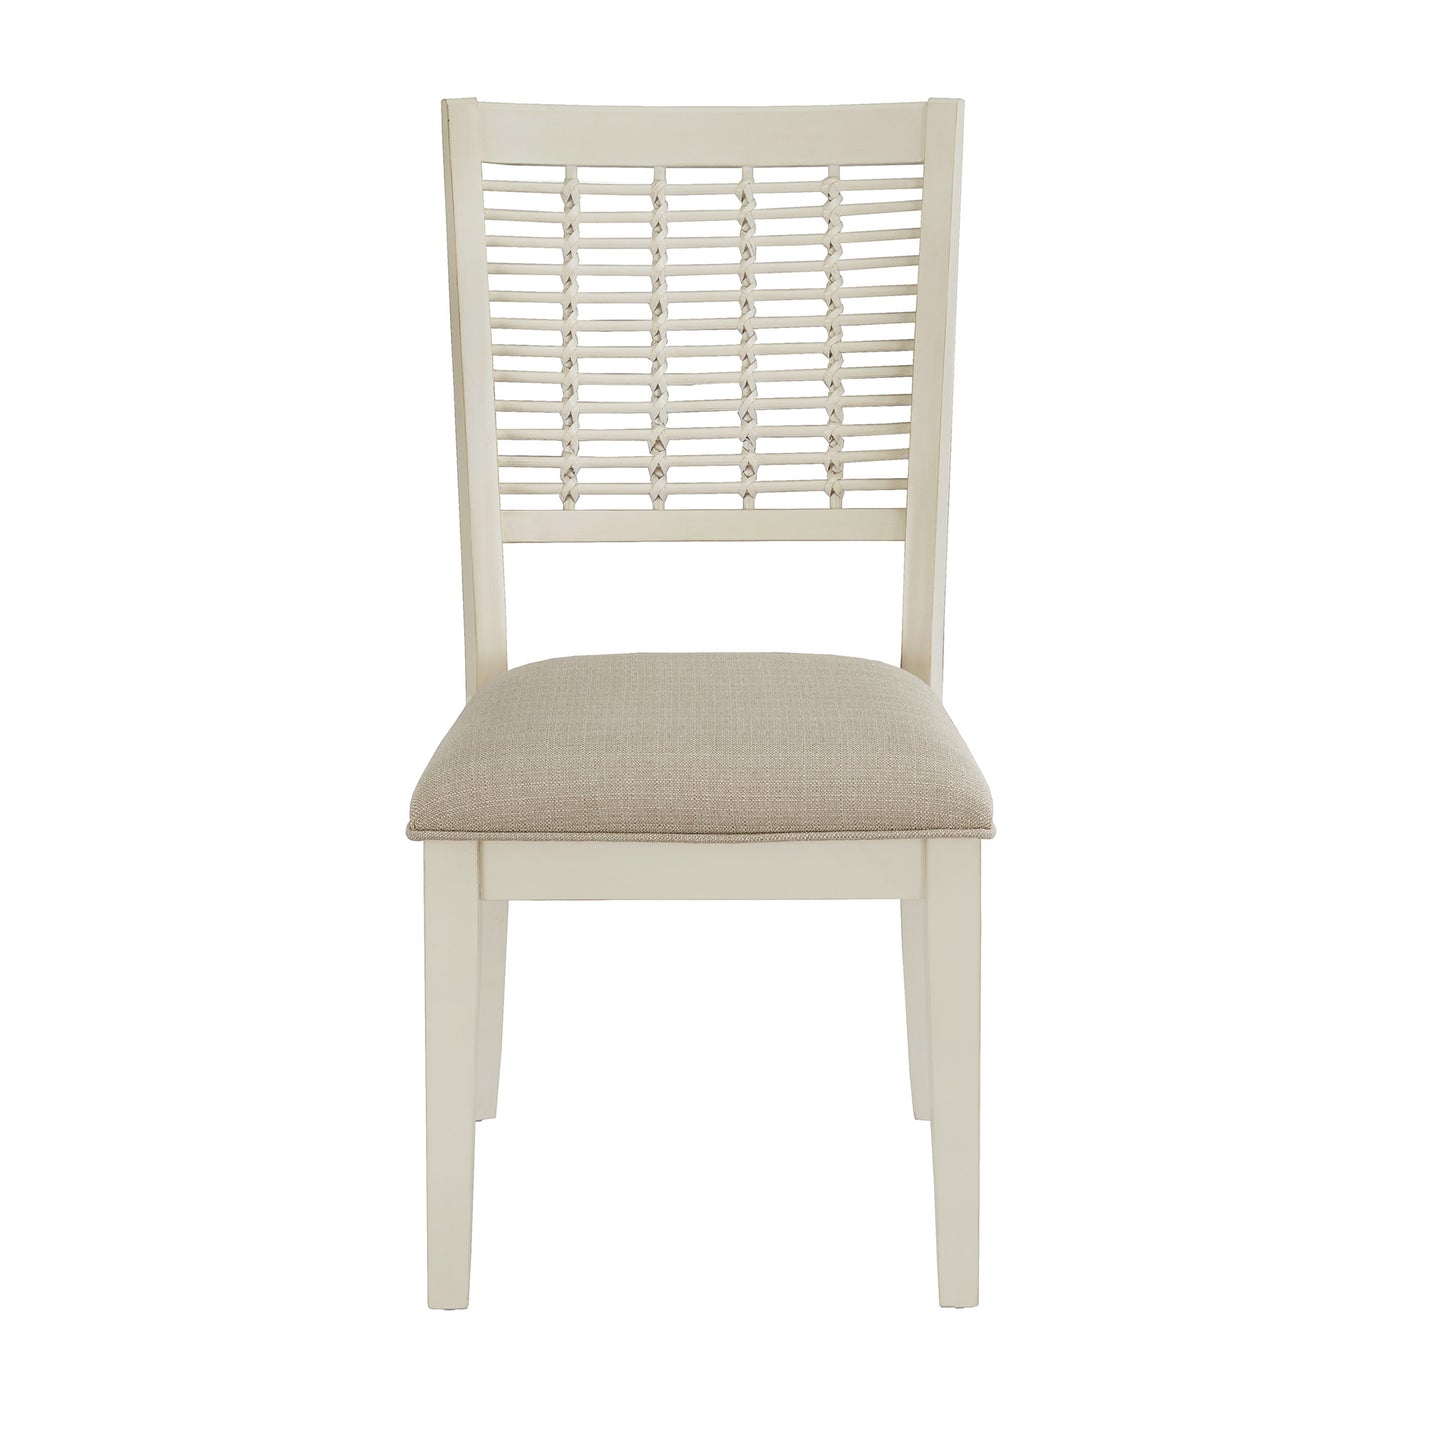 White Finish Wicker Dining Chair (Set of 2) - Brown Fabric